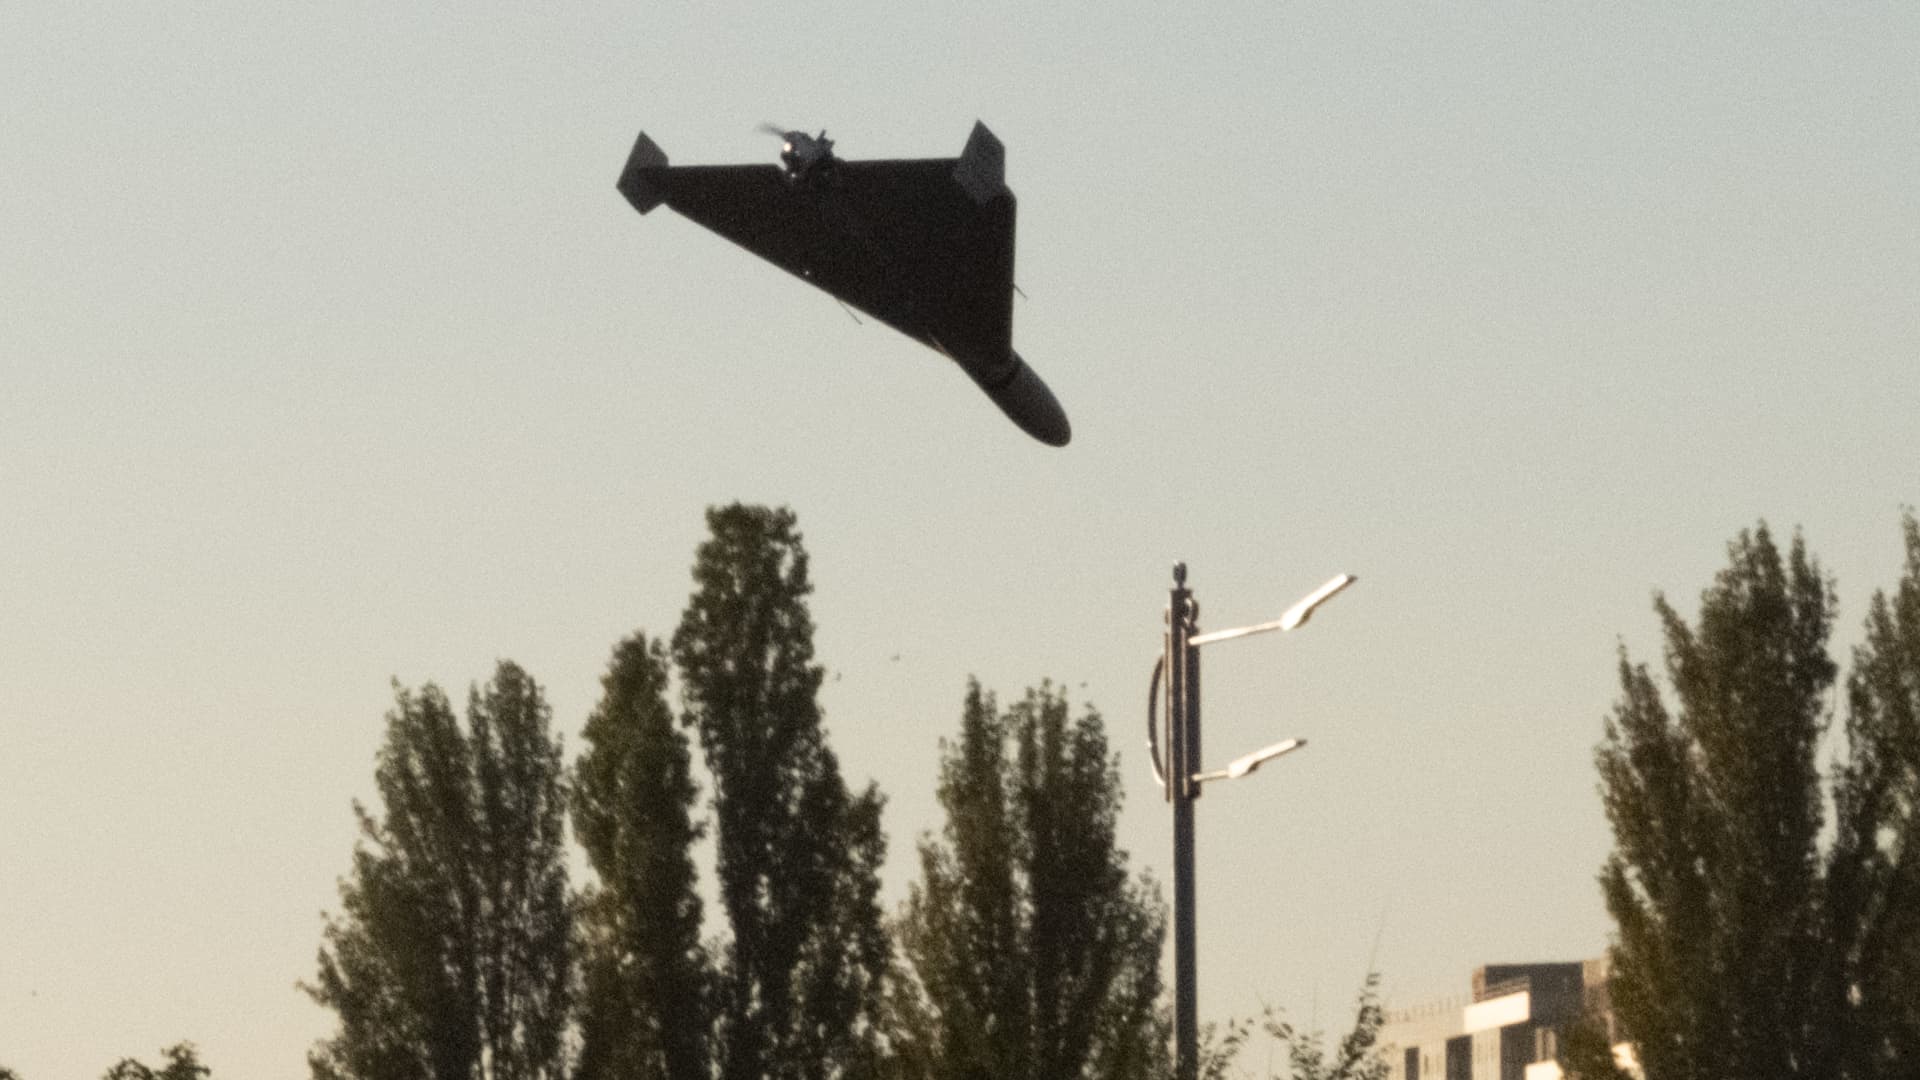 A self-detonating drone approaches for an attack in Kyiv on Oct. 17, 2022.